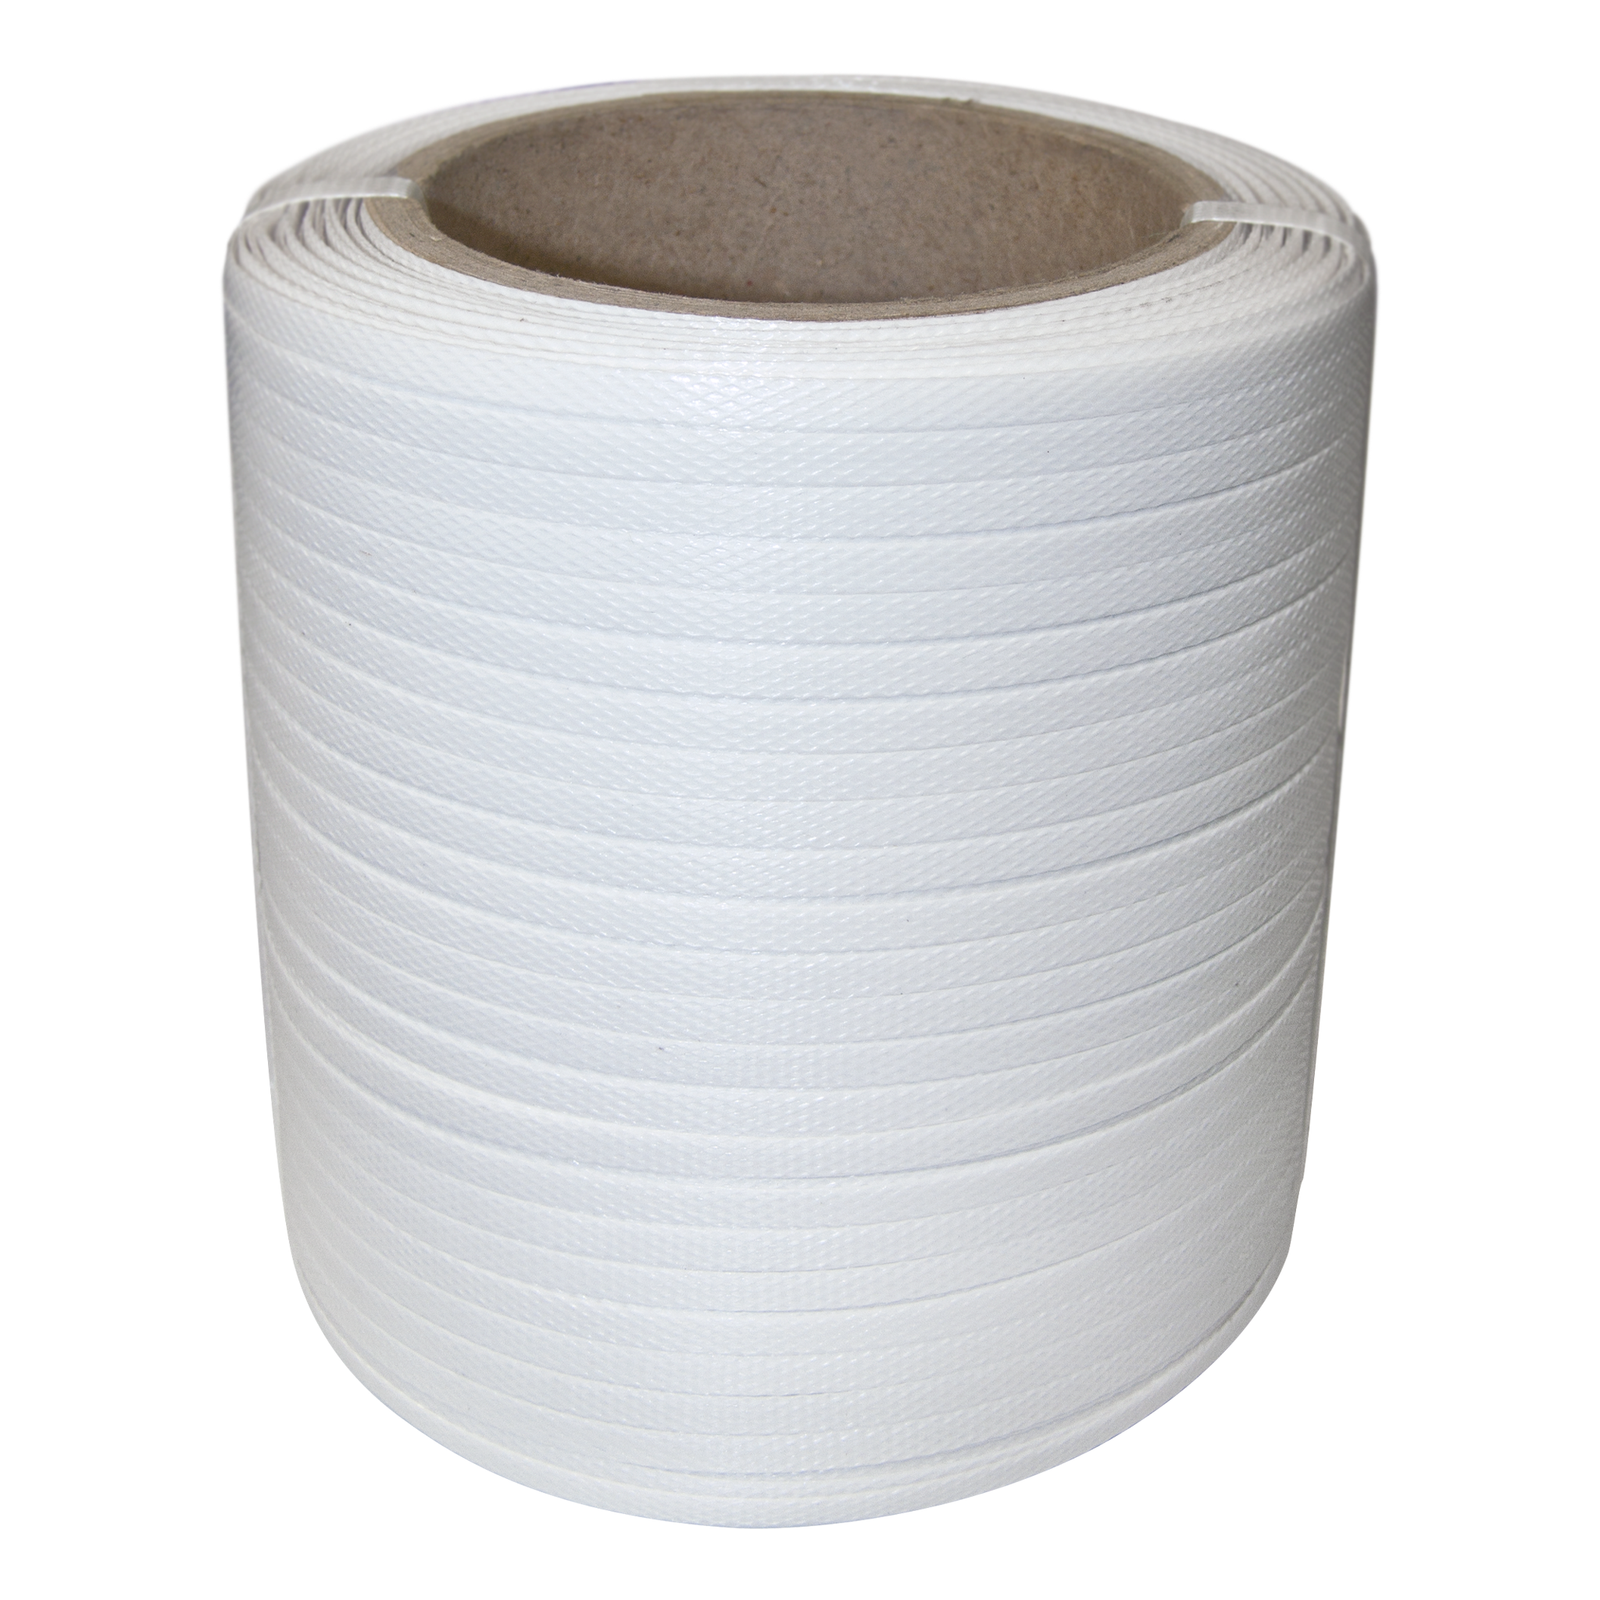 White roll of 1/4 inch thick poly strapping band 